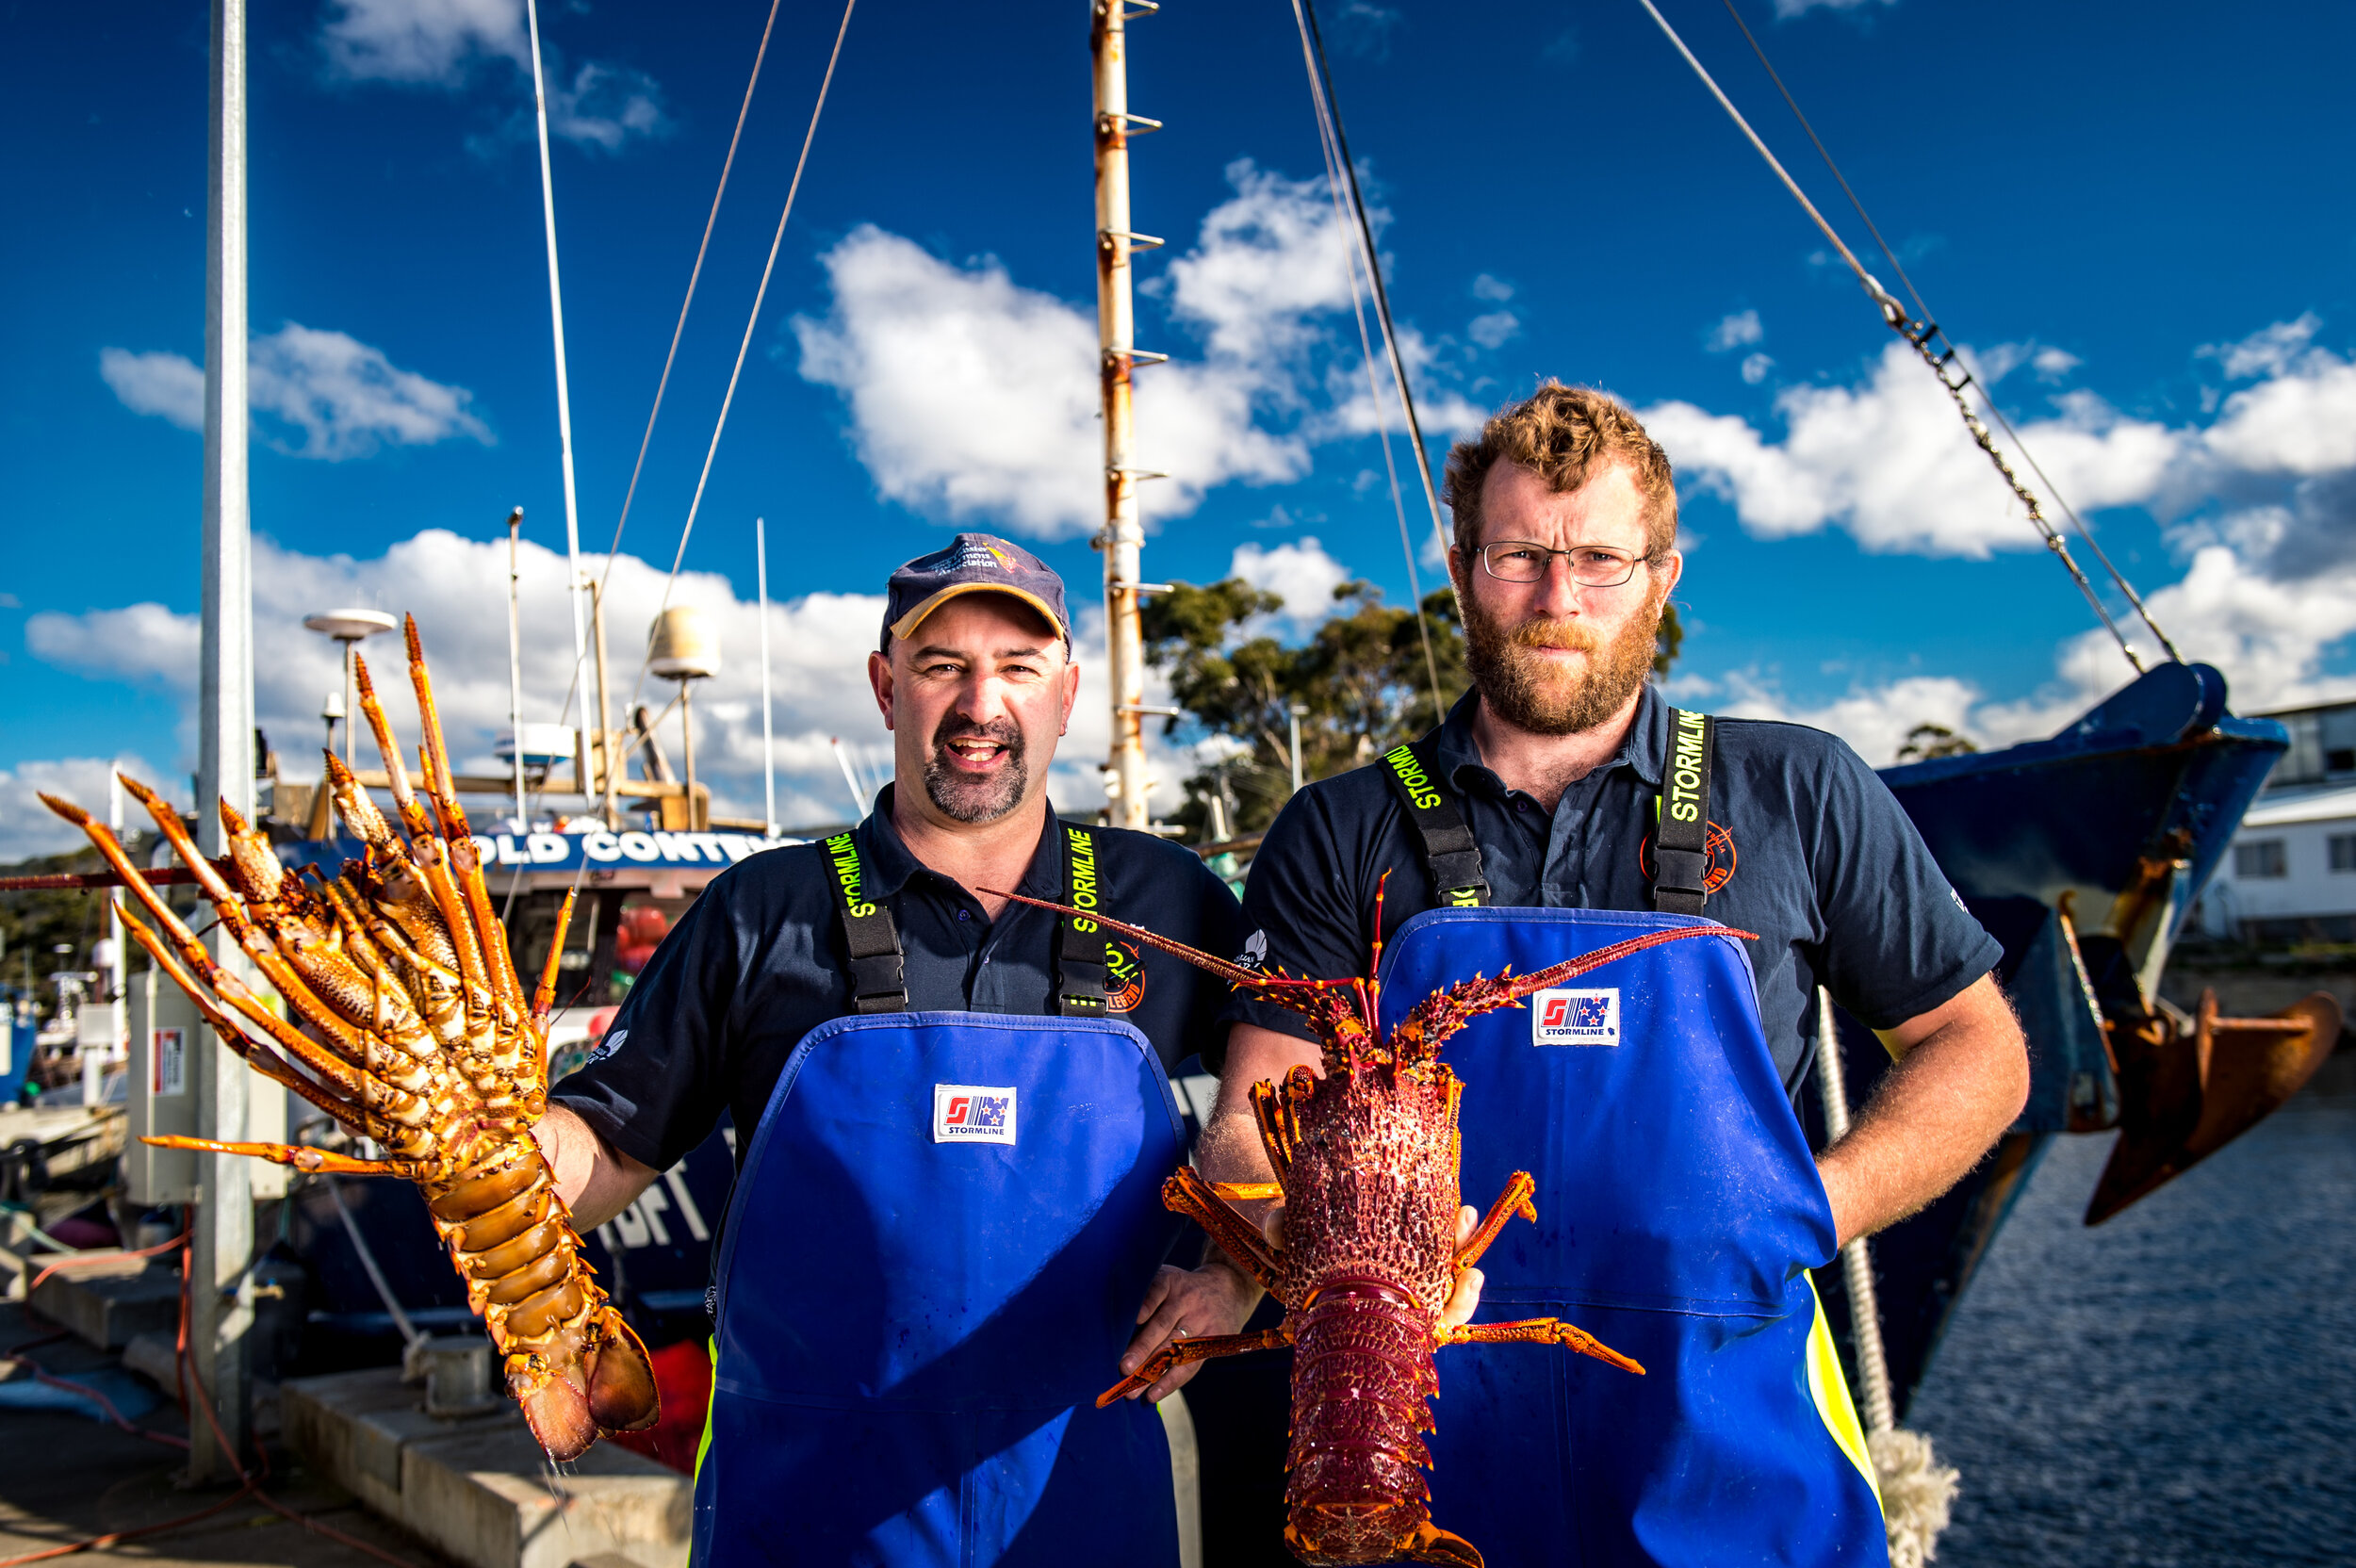 _BOLD CONTENDER_SQUIZZY _ TABOR_HOLDING LOBSTERS AT PORT_20190721_6020.jpg